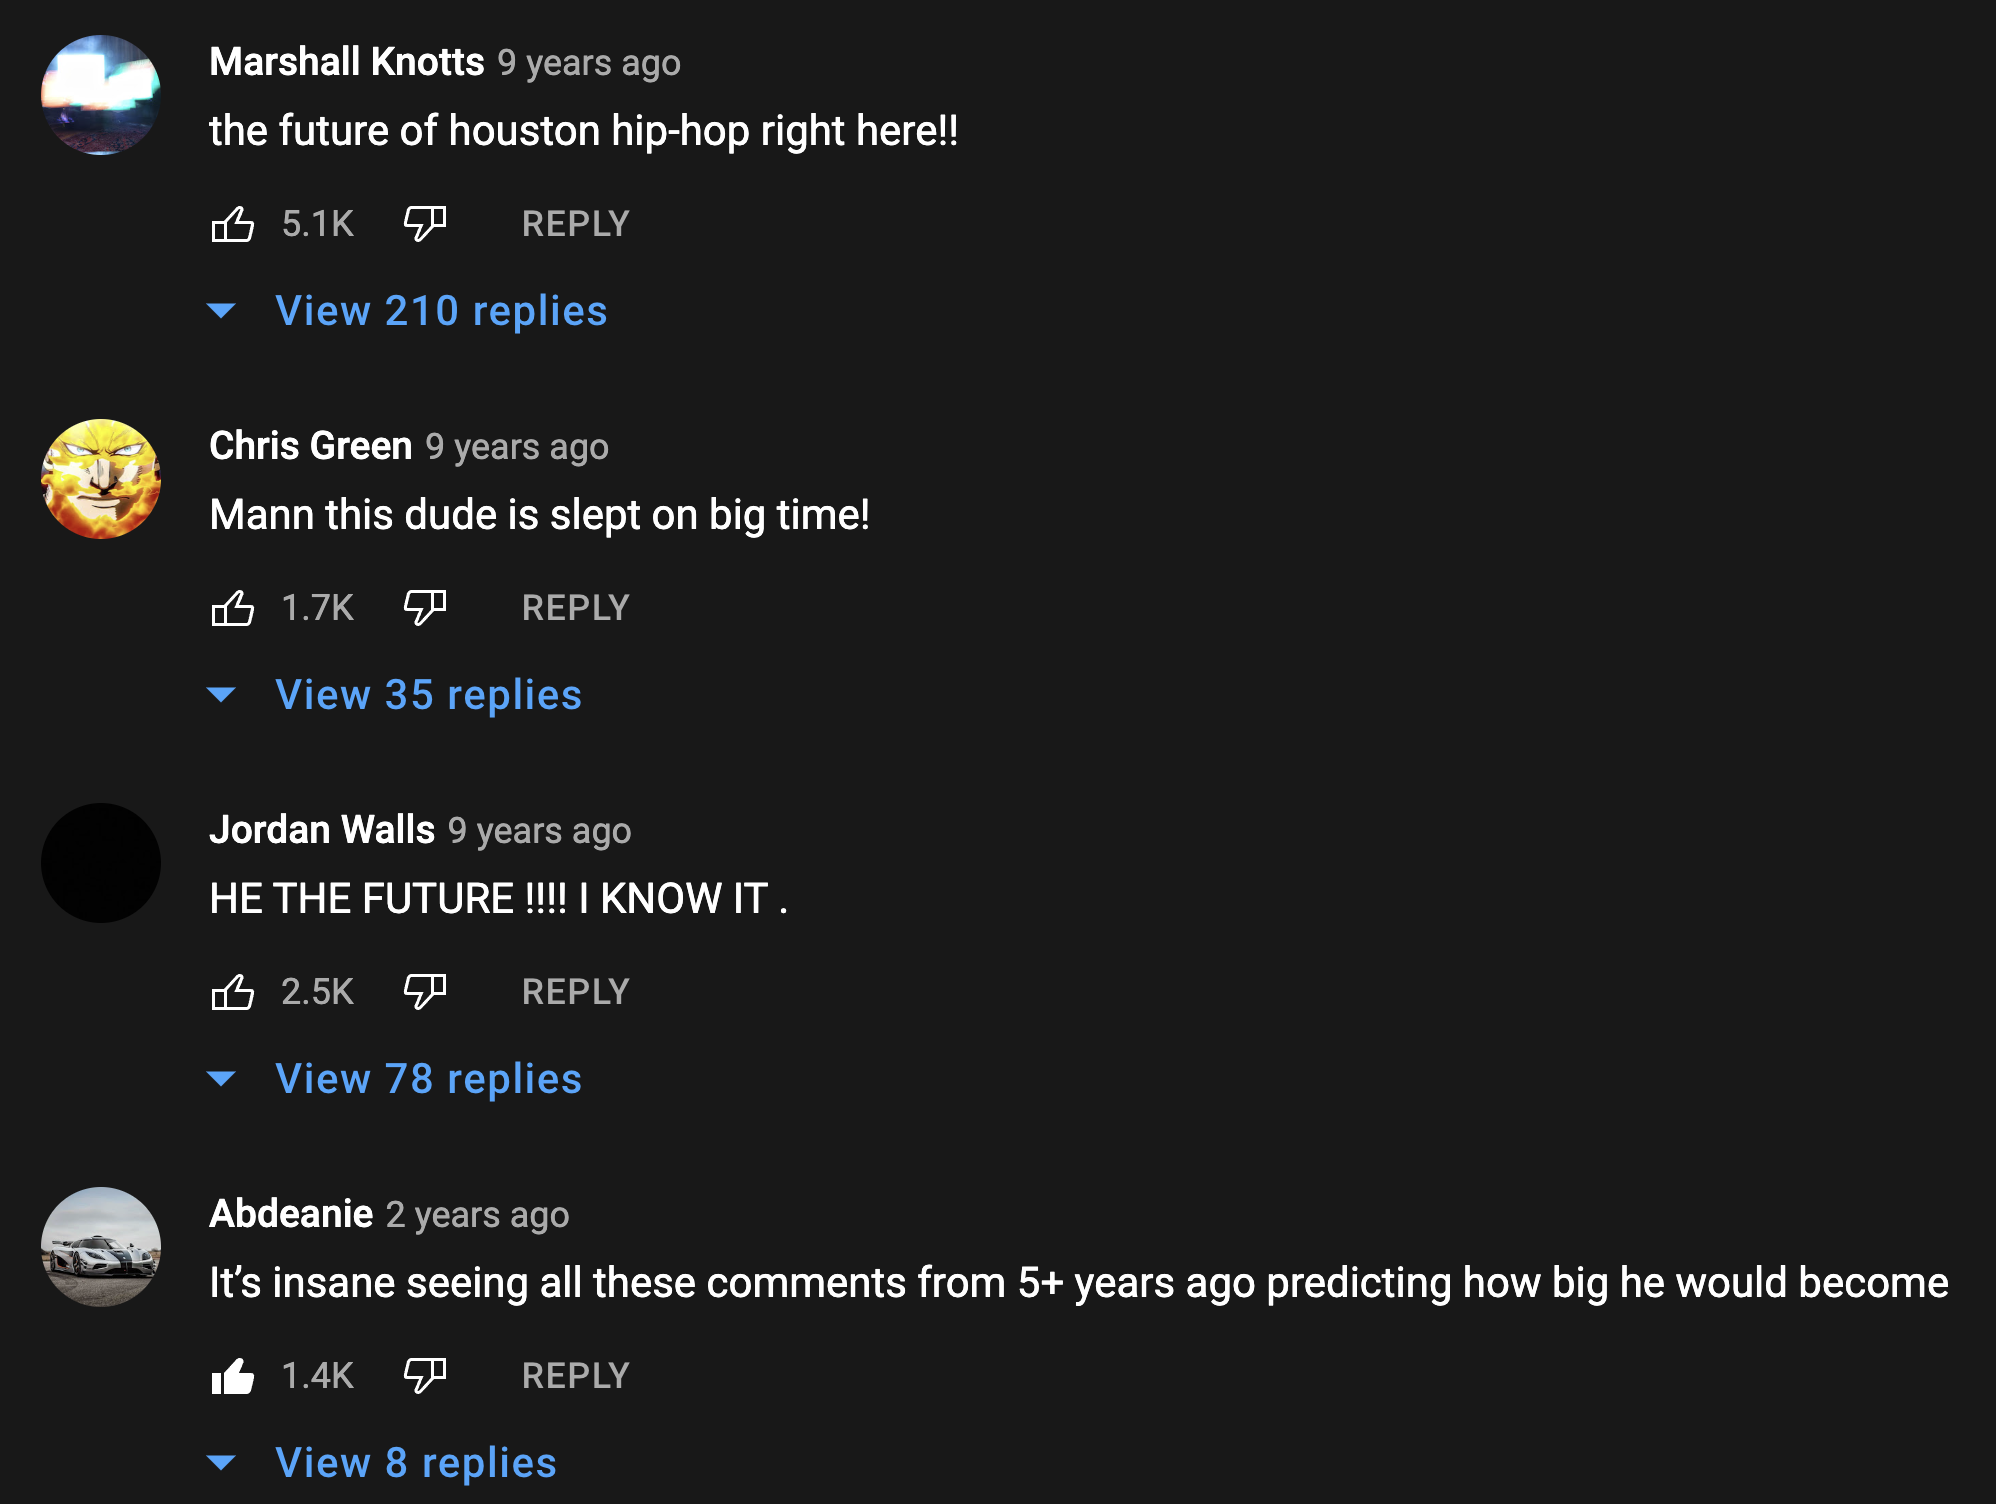 YouTube comment section on one of Travis Scott's first songs "16 Chapels" [screenshot taken June 17th, 2022] What if these early supporters were able to carry this reputation & respect outside of the YT comment section, both IRL and across other online platforms? If someone bought the song as an NFT 10 years ago, how much would it be worth to Travis' #1 fan today?